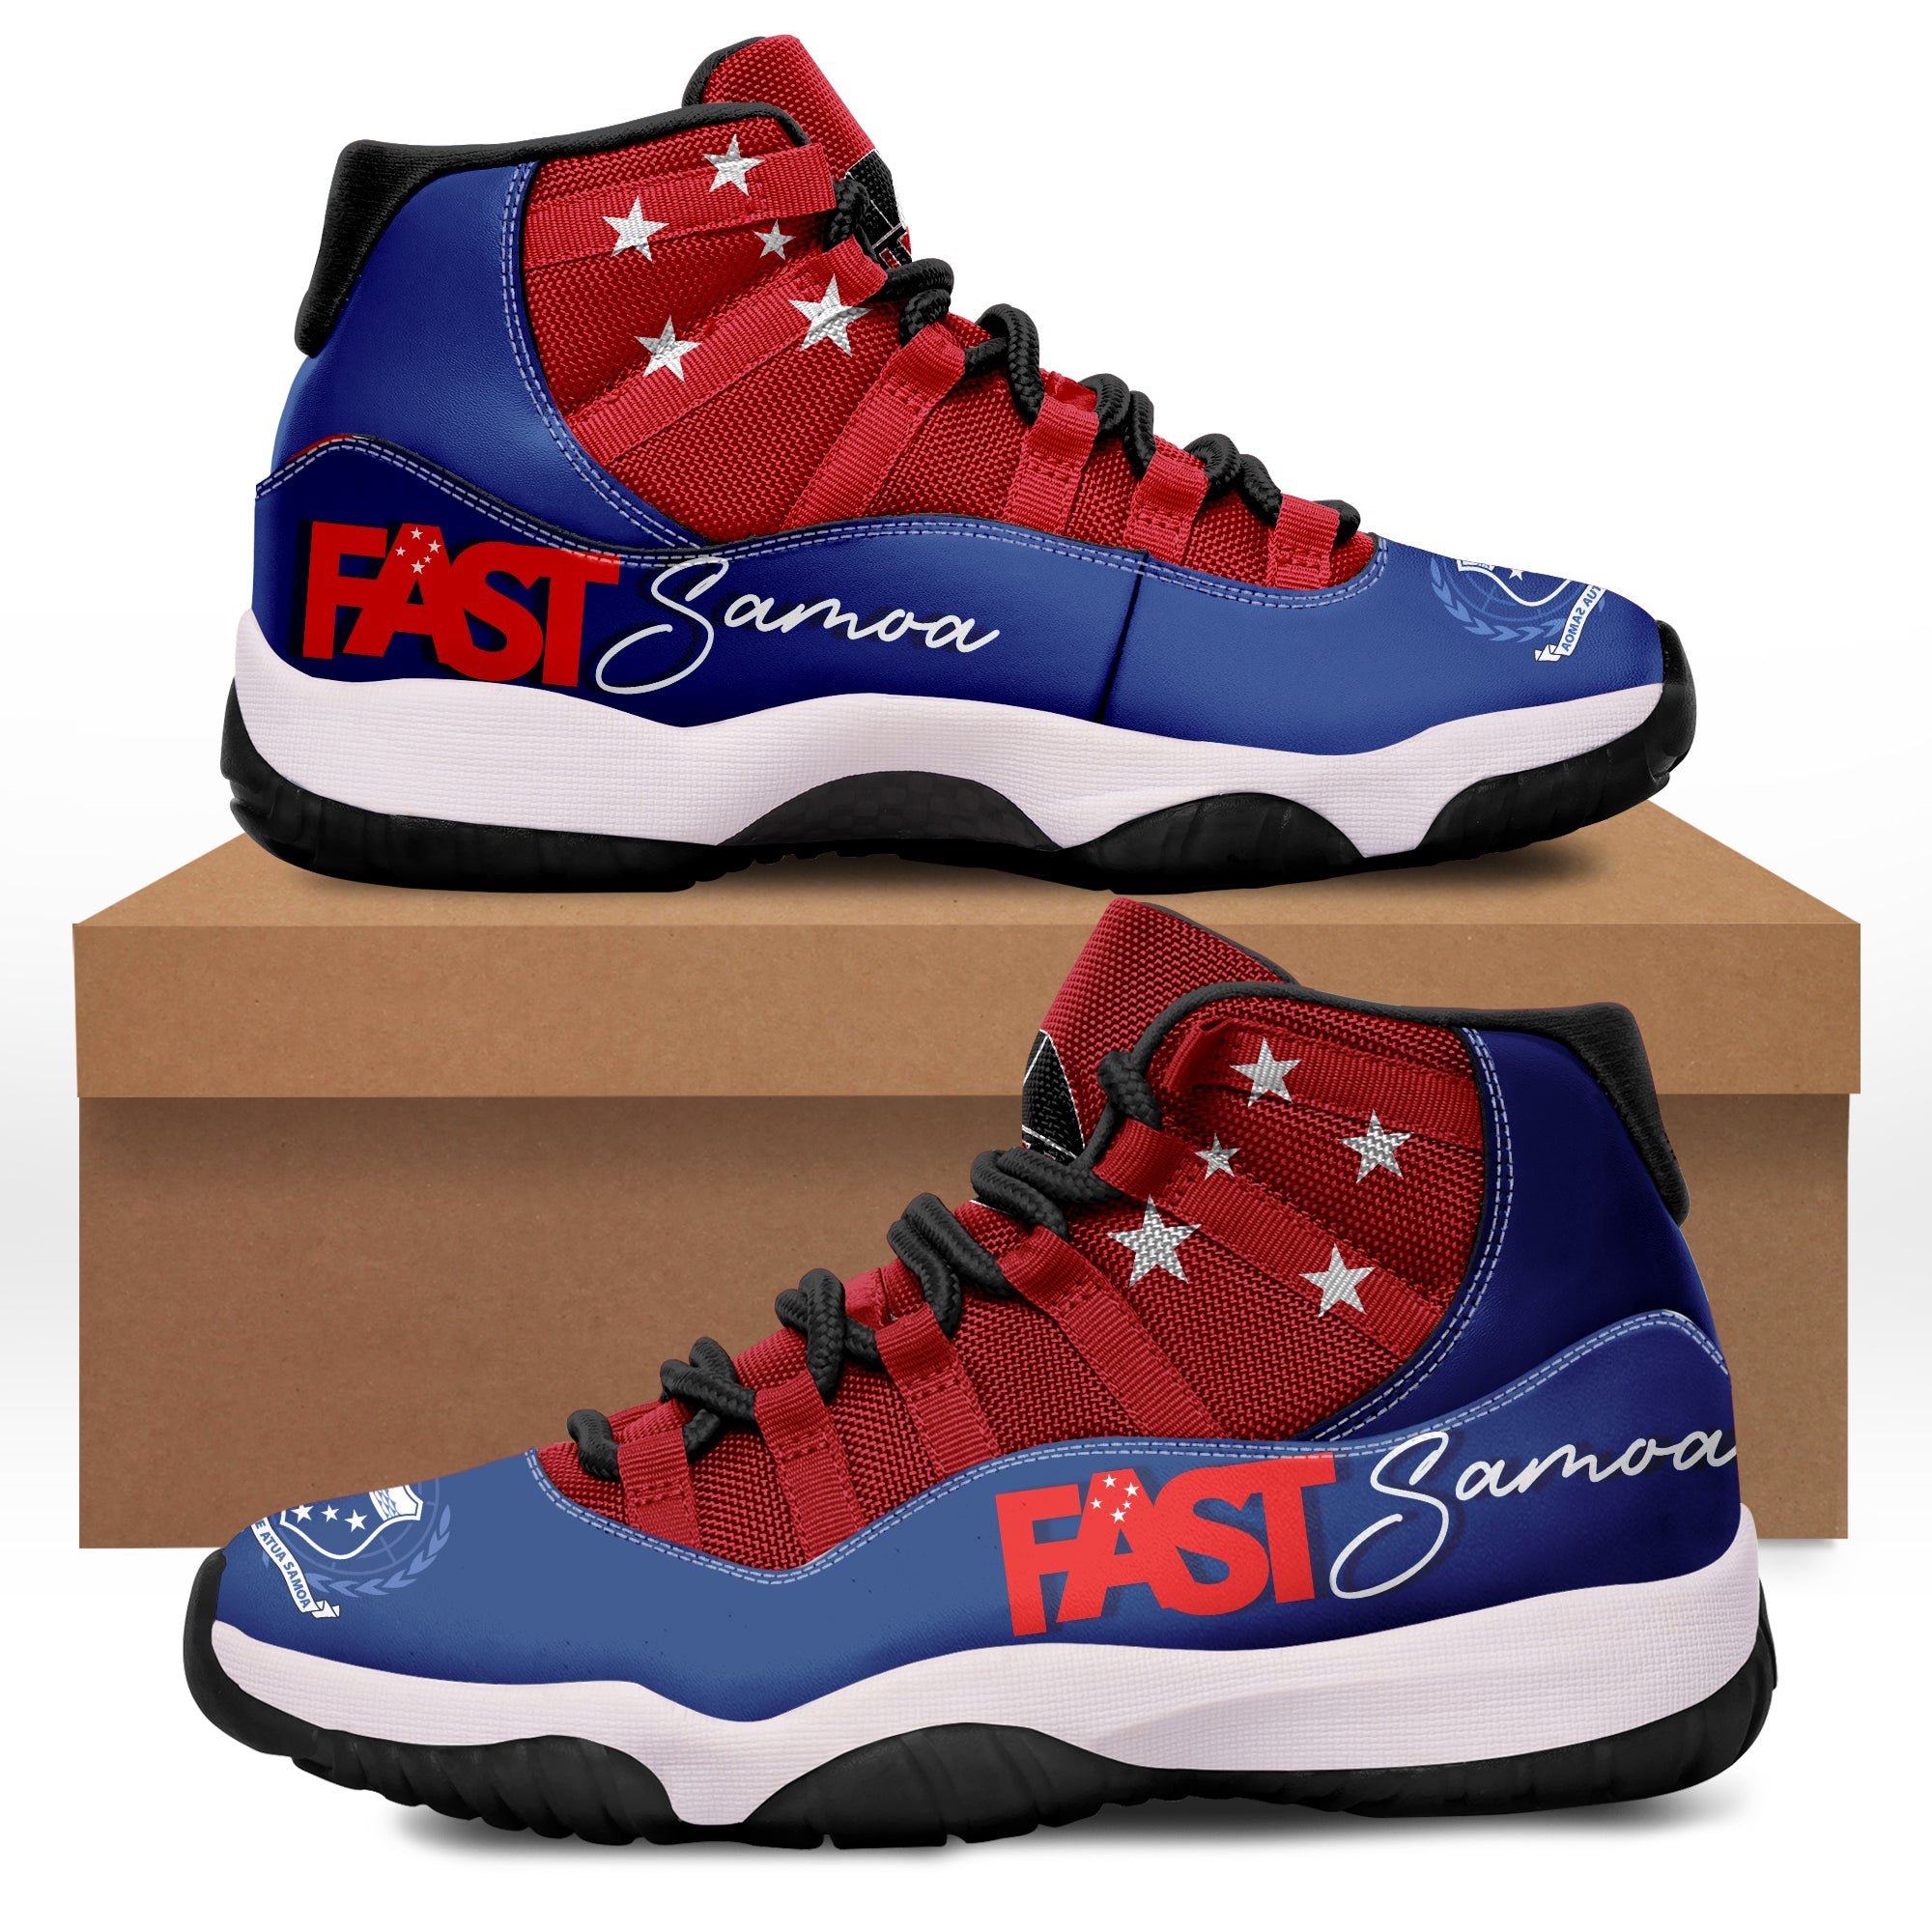 FAST Samoa Sneakers J.11 Special Style Ver.02 LT7 Blue - Polynesian Pride